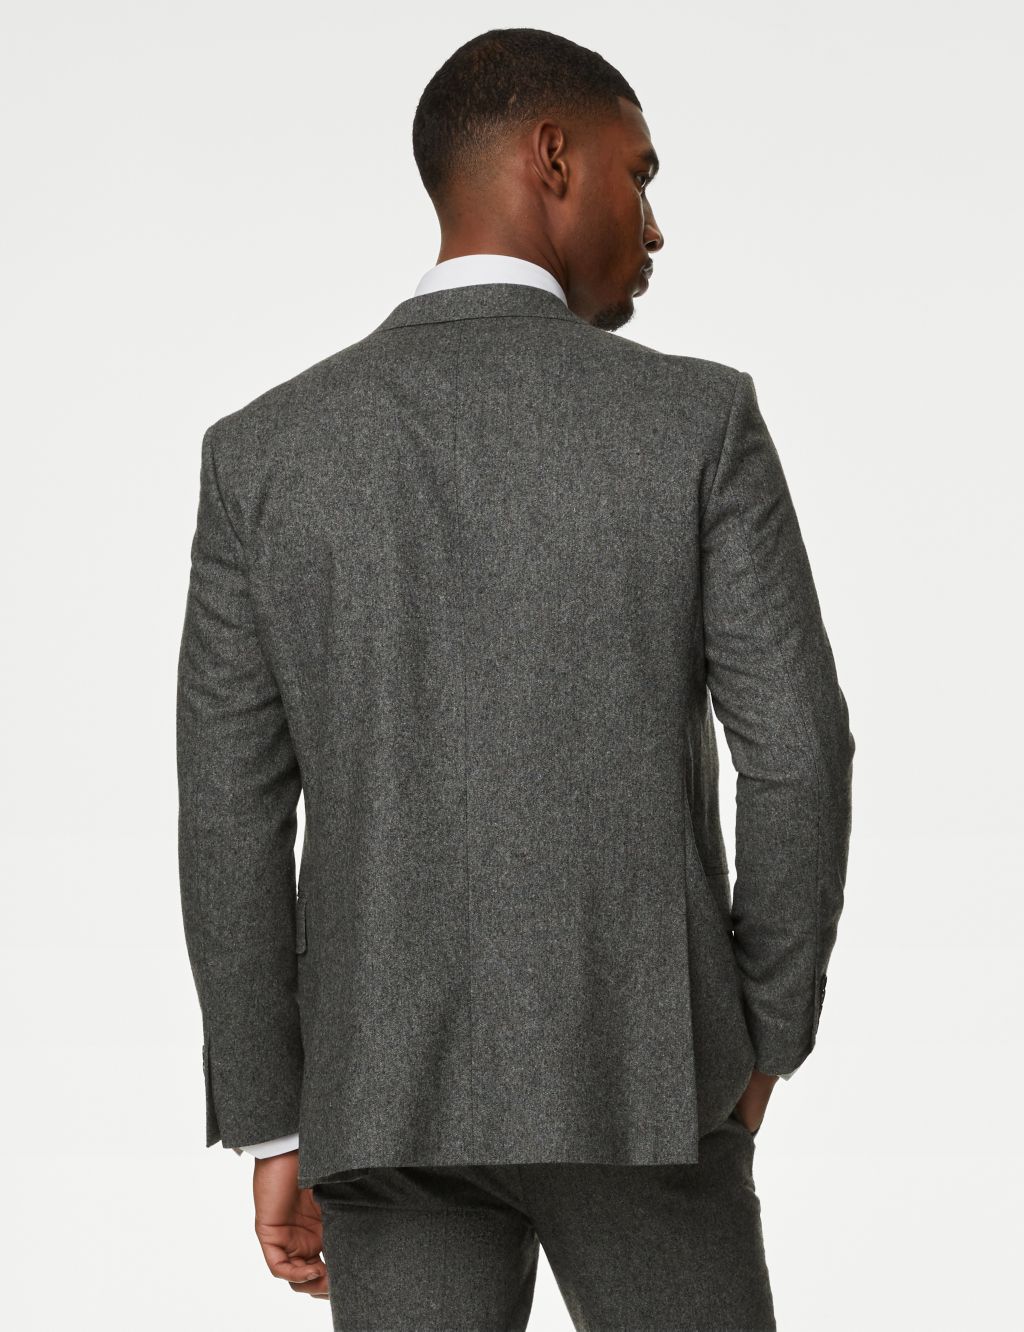 Tailored Fit Italian Wool Rich Suit Jacket image 4